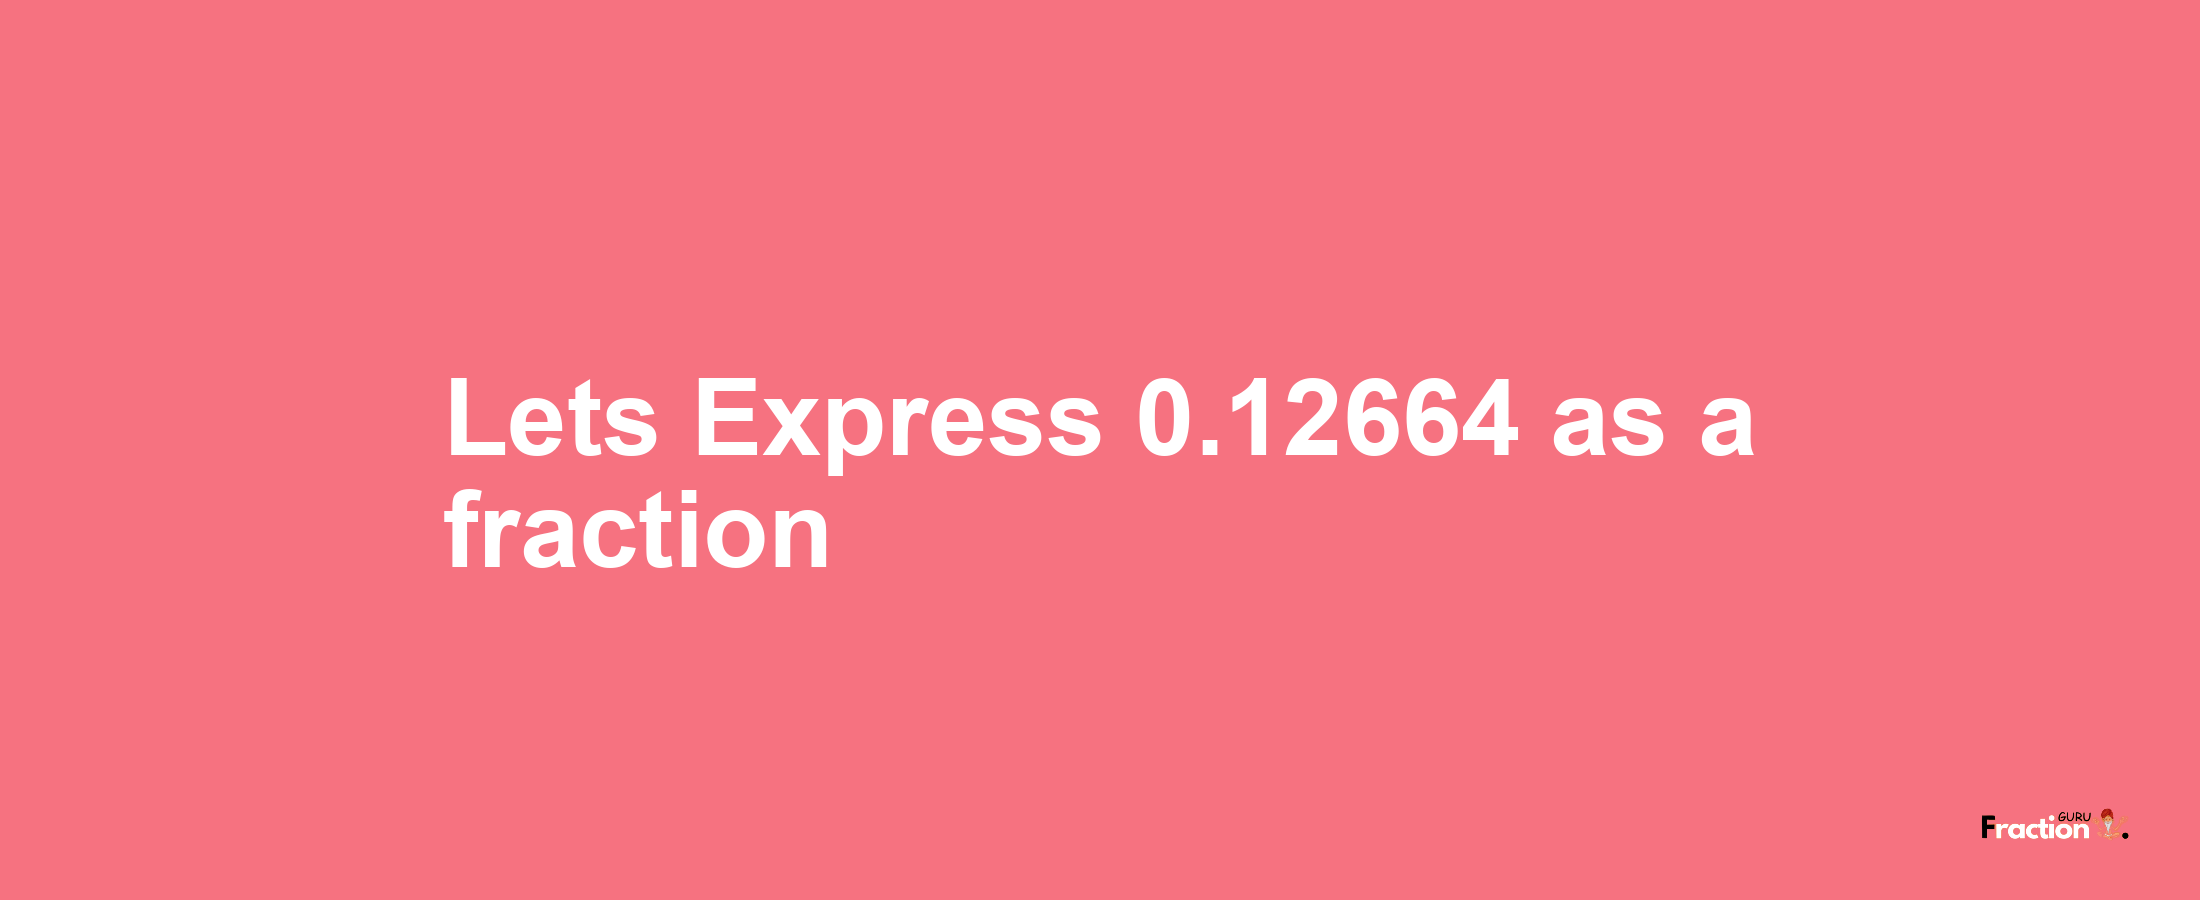 Lets Express 0.12664 as afraction